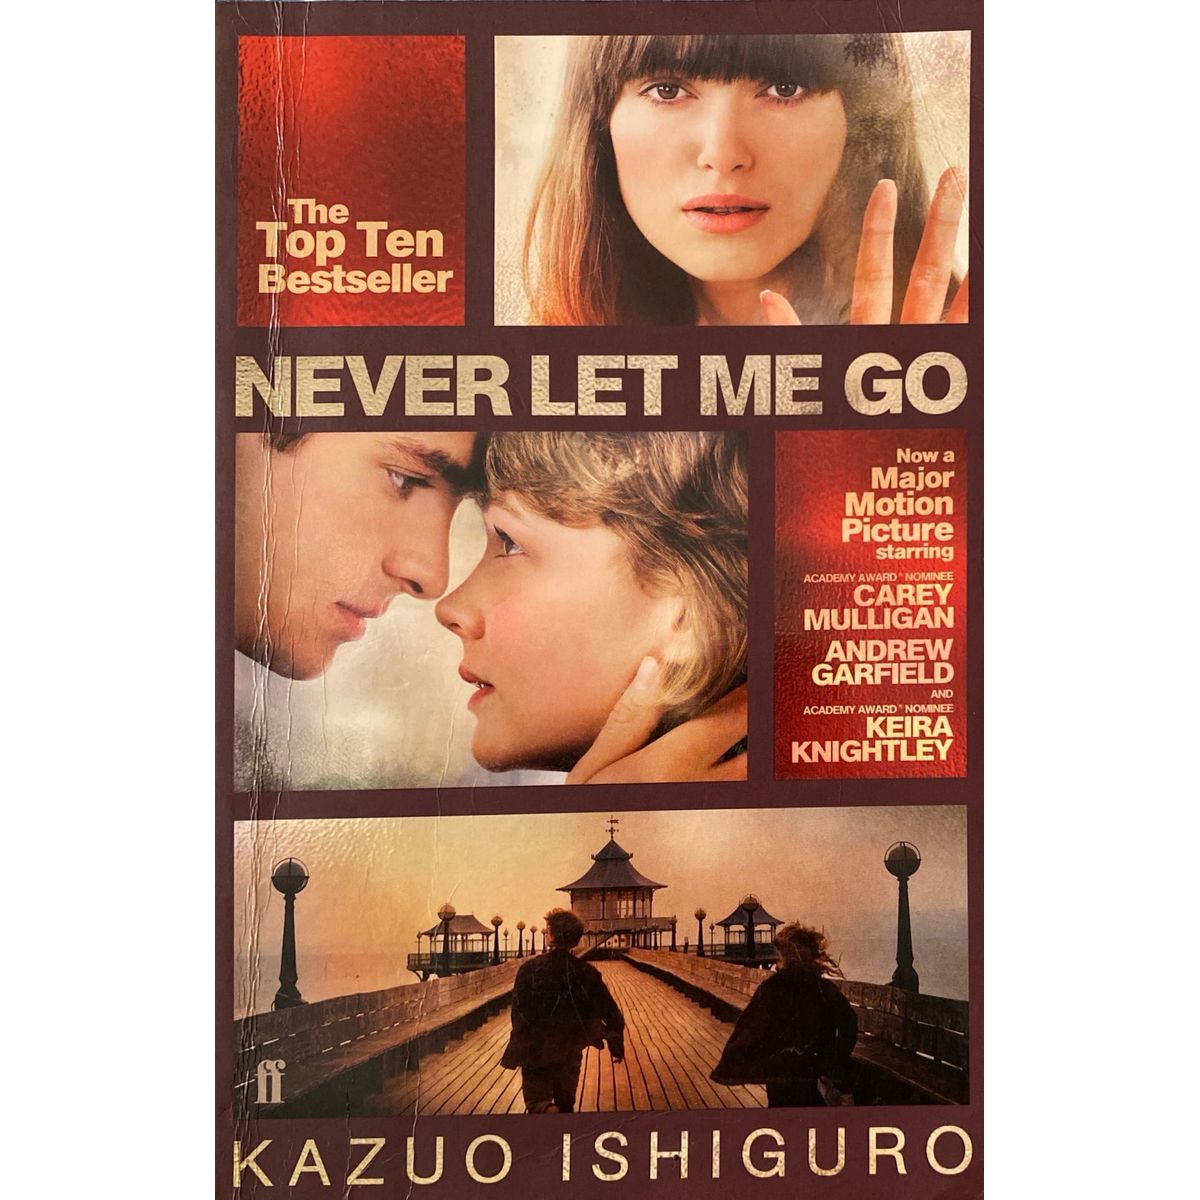 ISBN: 9780571272129 / 0571272126 - Never Let Me Go by Ishiguro, Kazuo [2010]